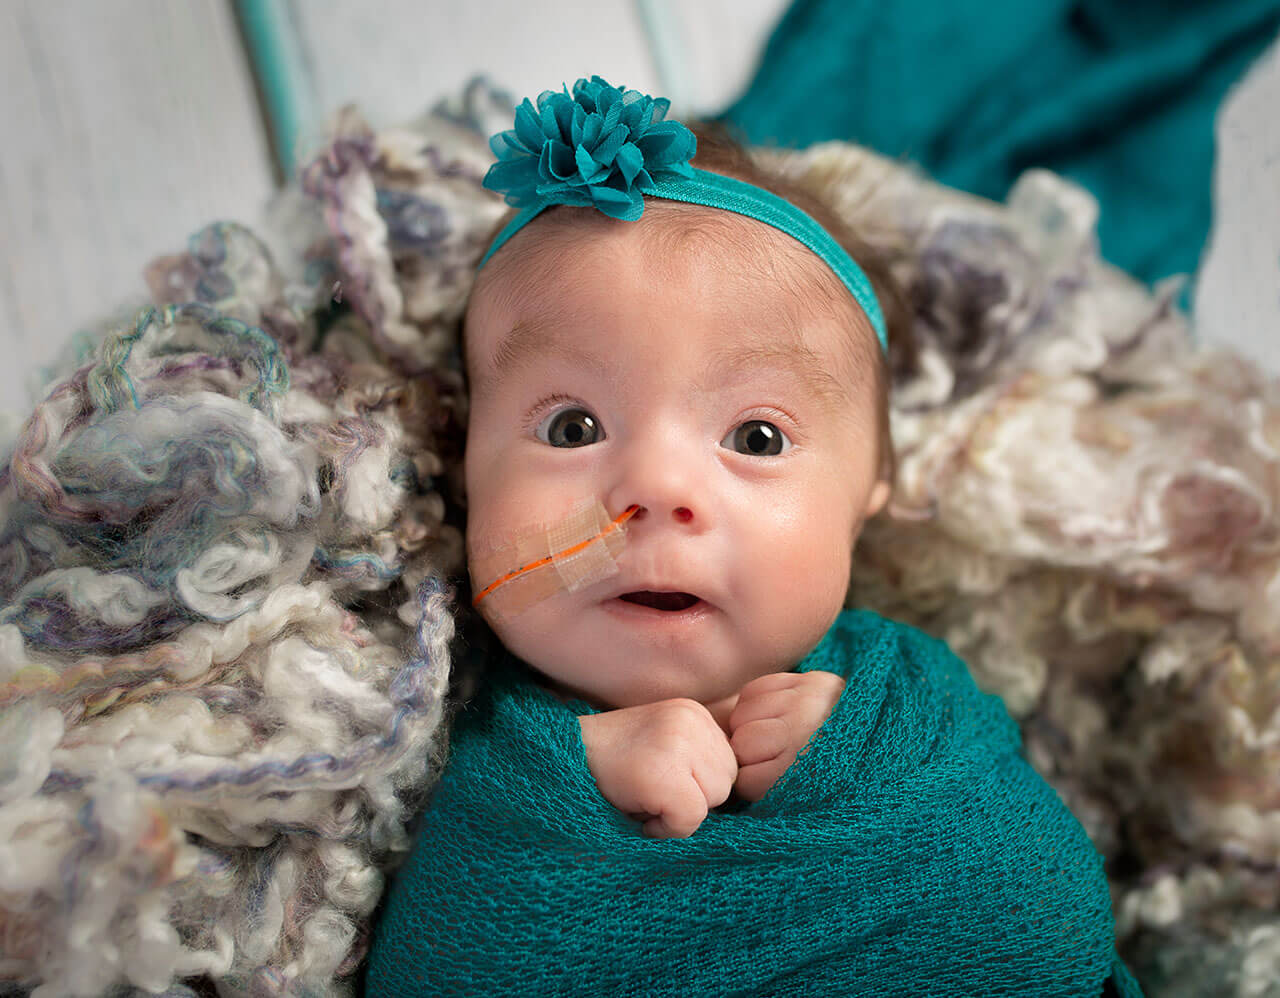 Adorable three month old special needs infant girl with teal bow